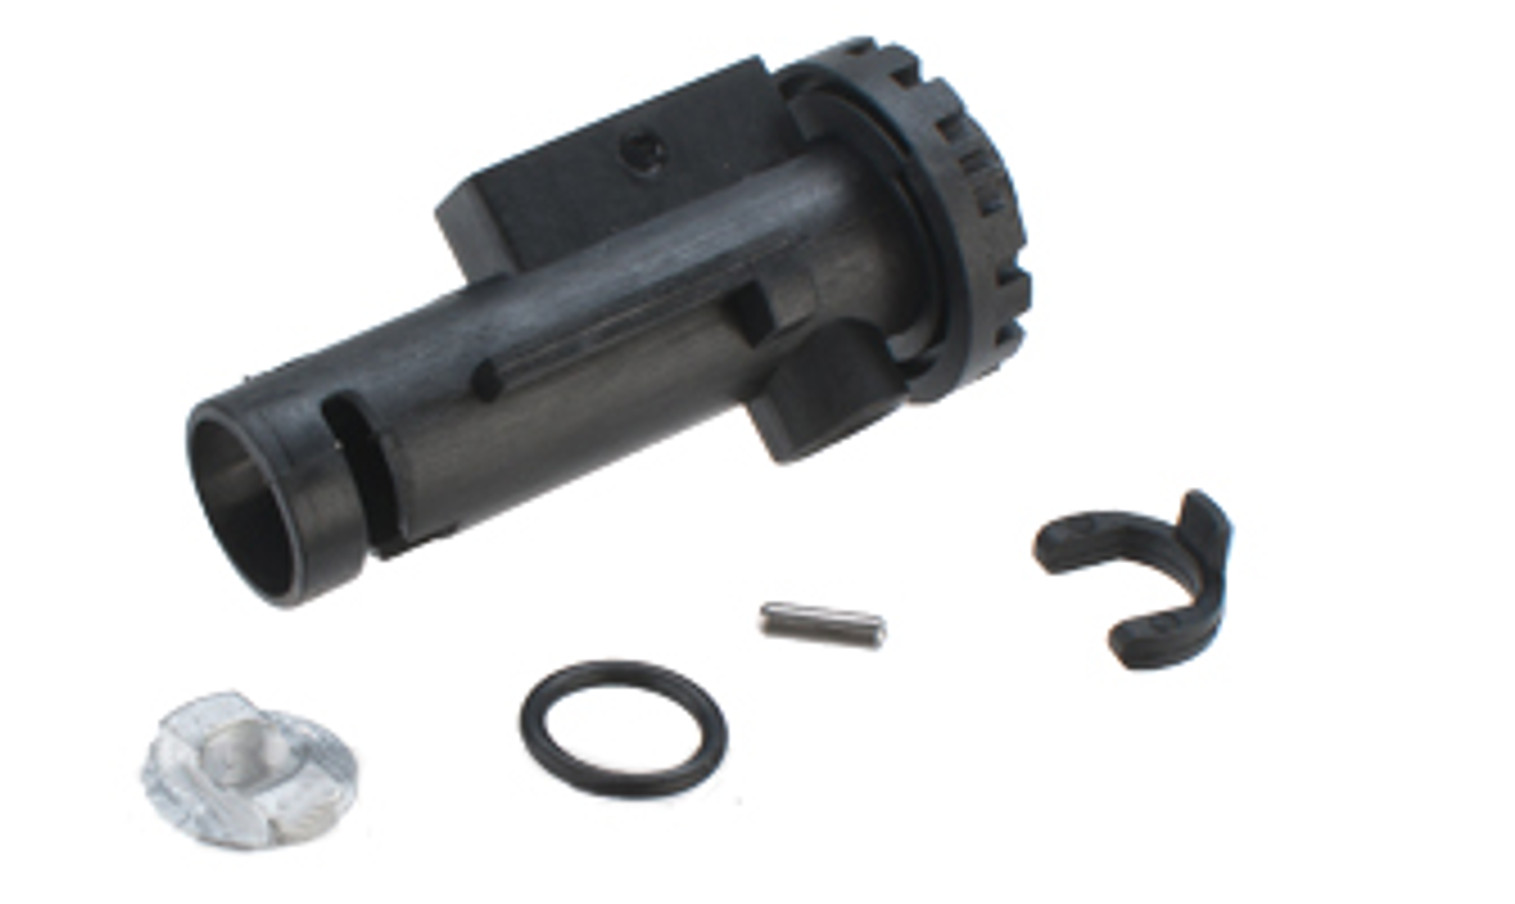 GHK Hopup Unit for AEG to GBB Conversion Gearboxes